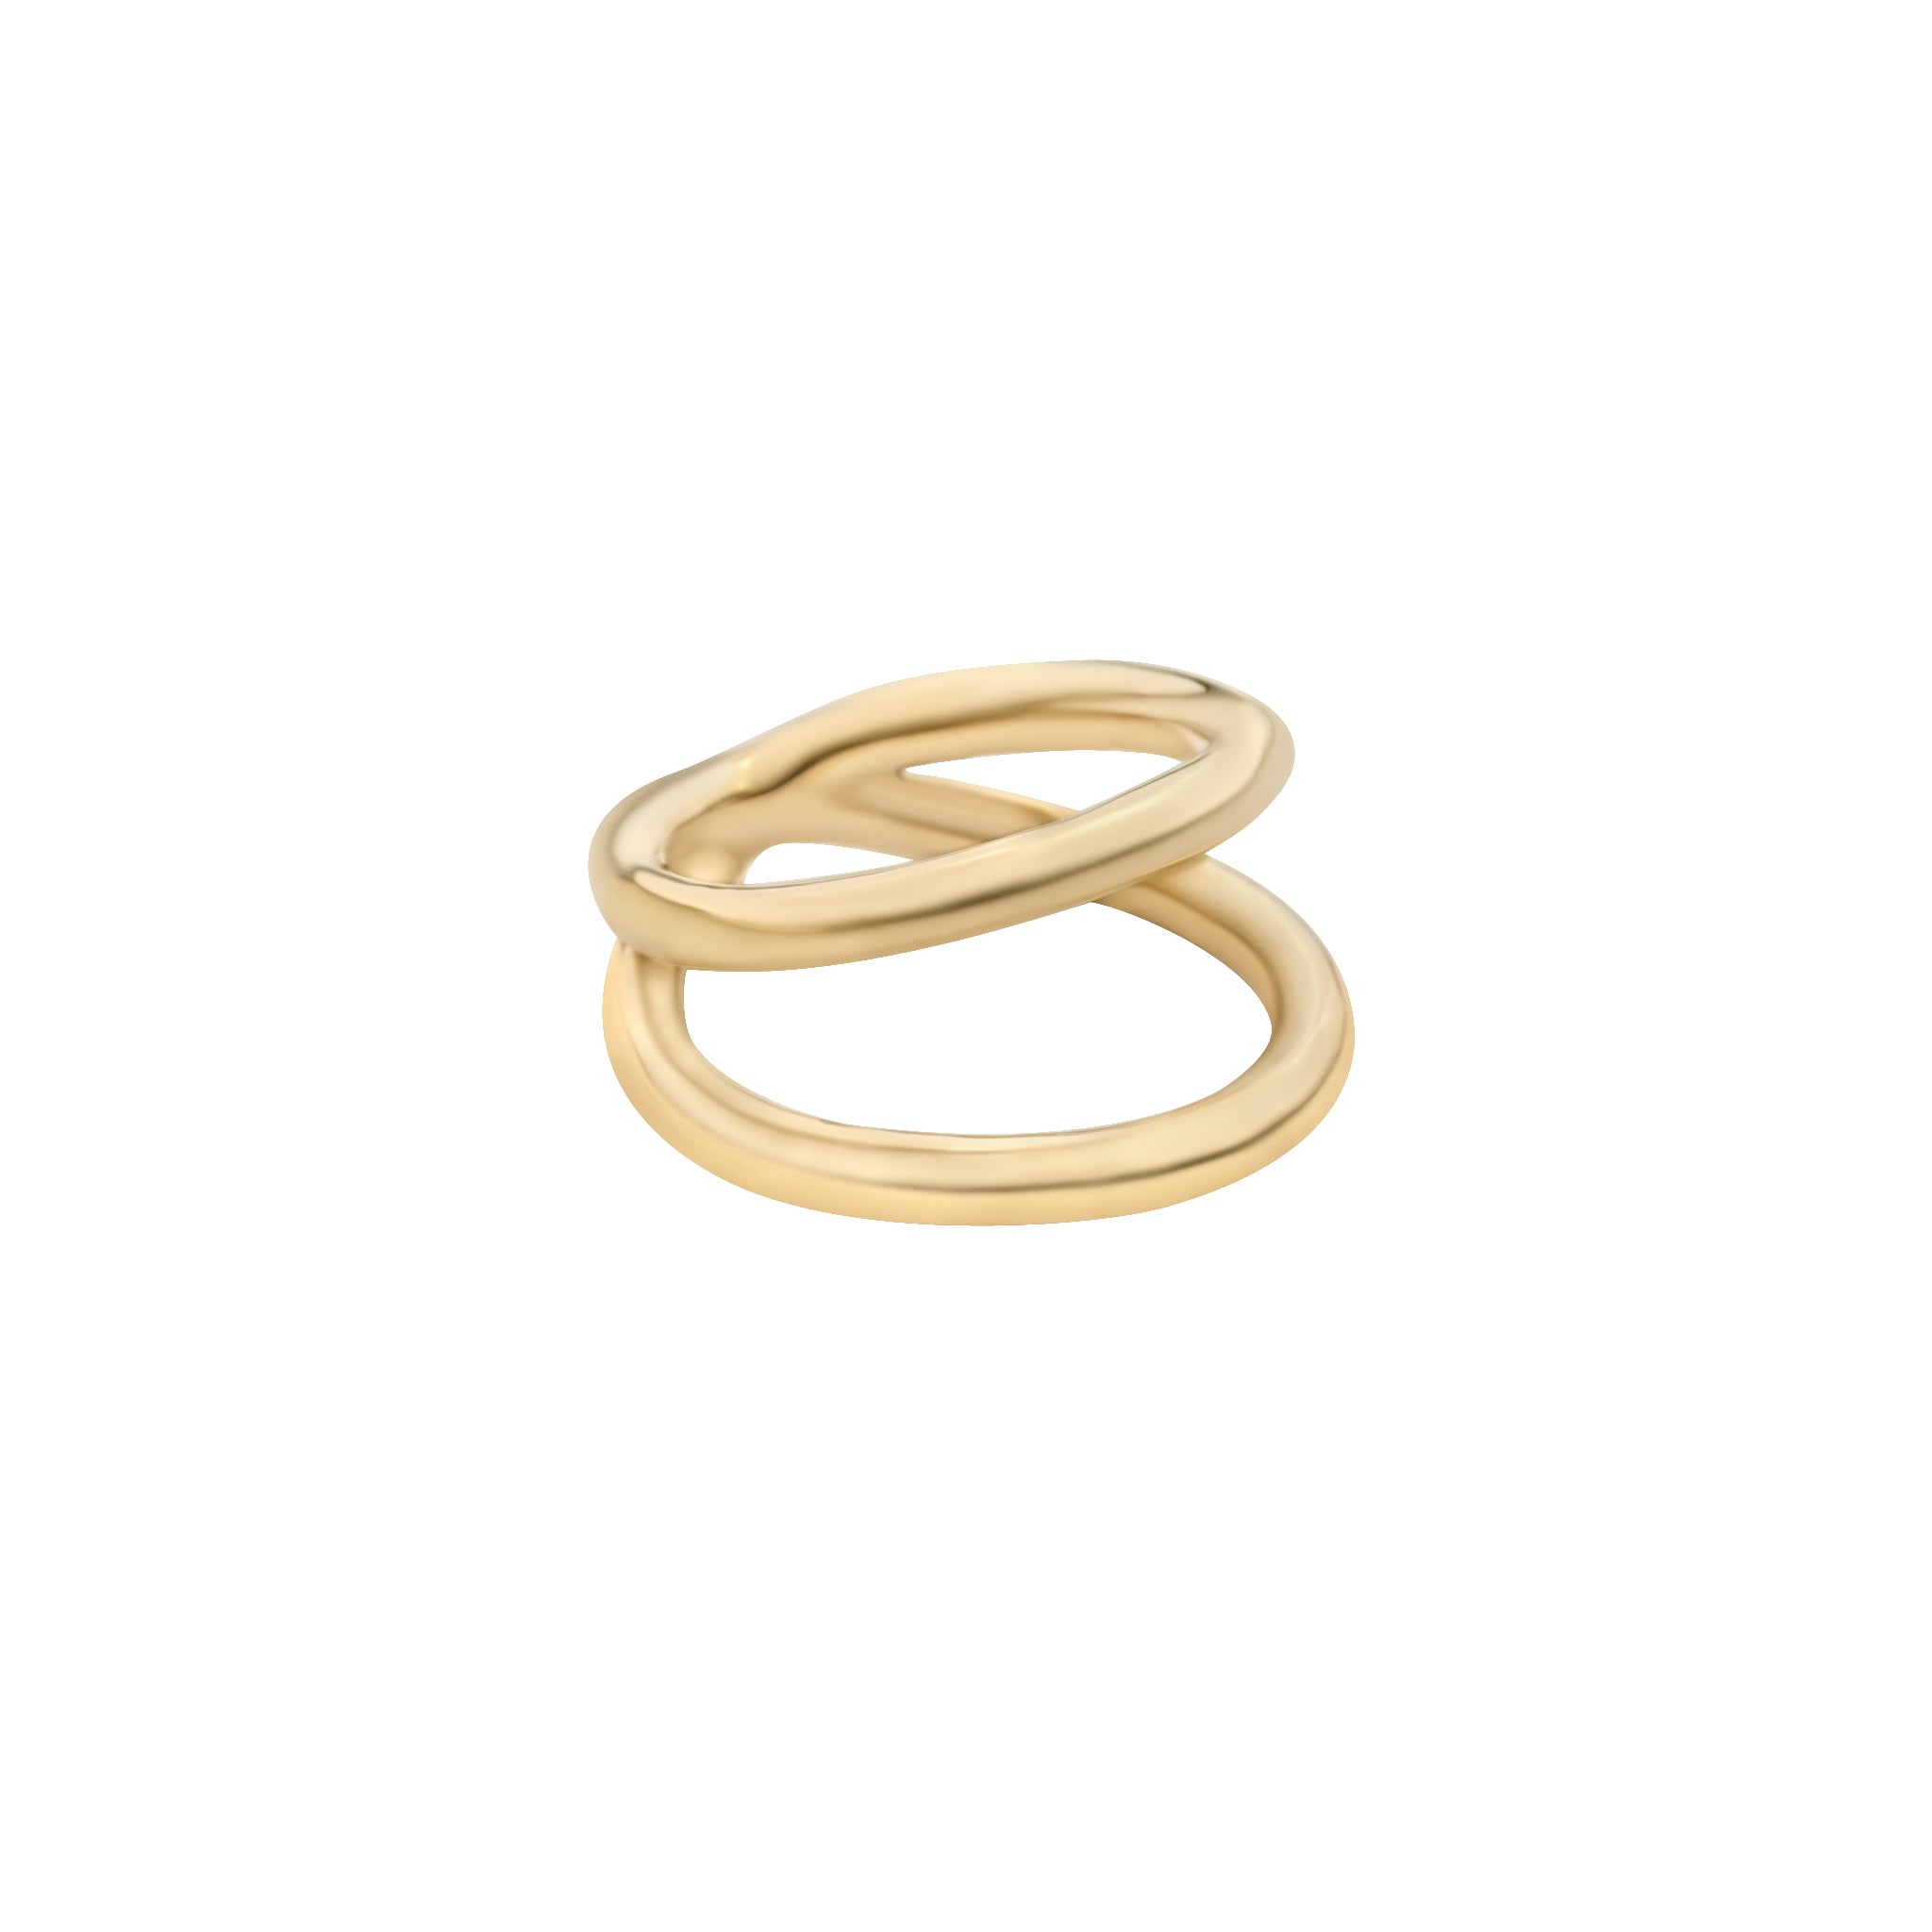 Ficelle ring in bronze